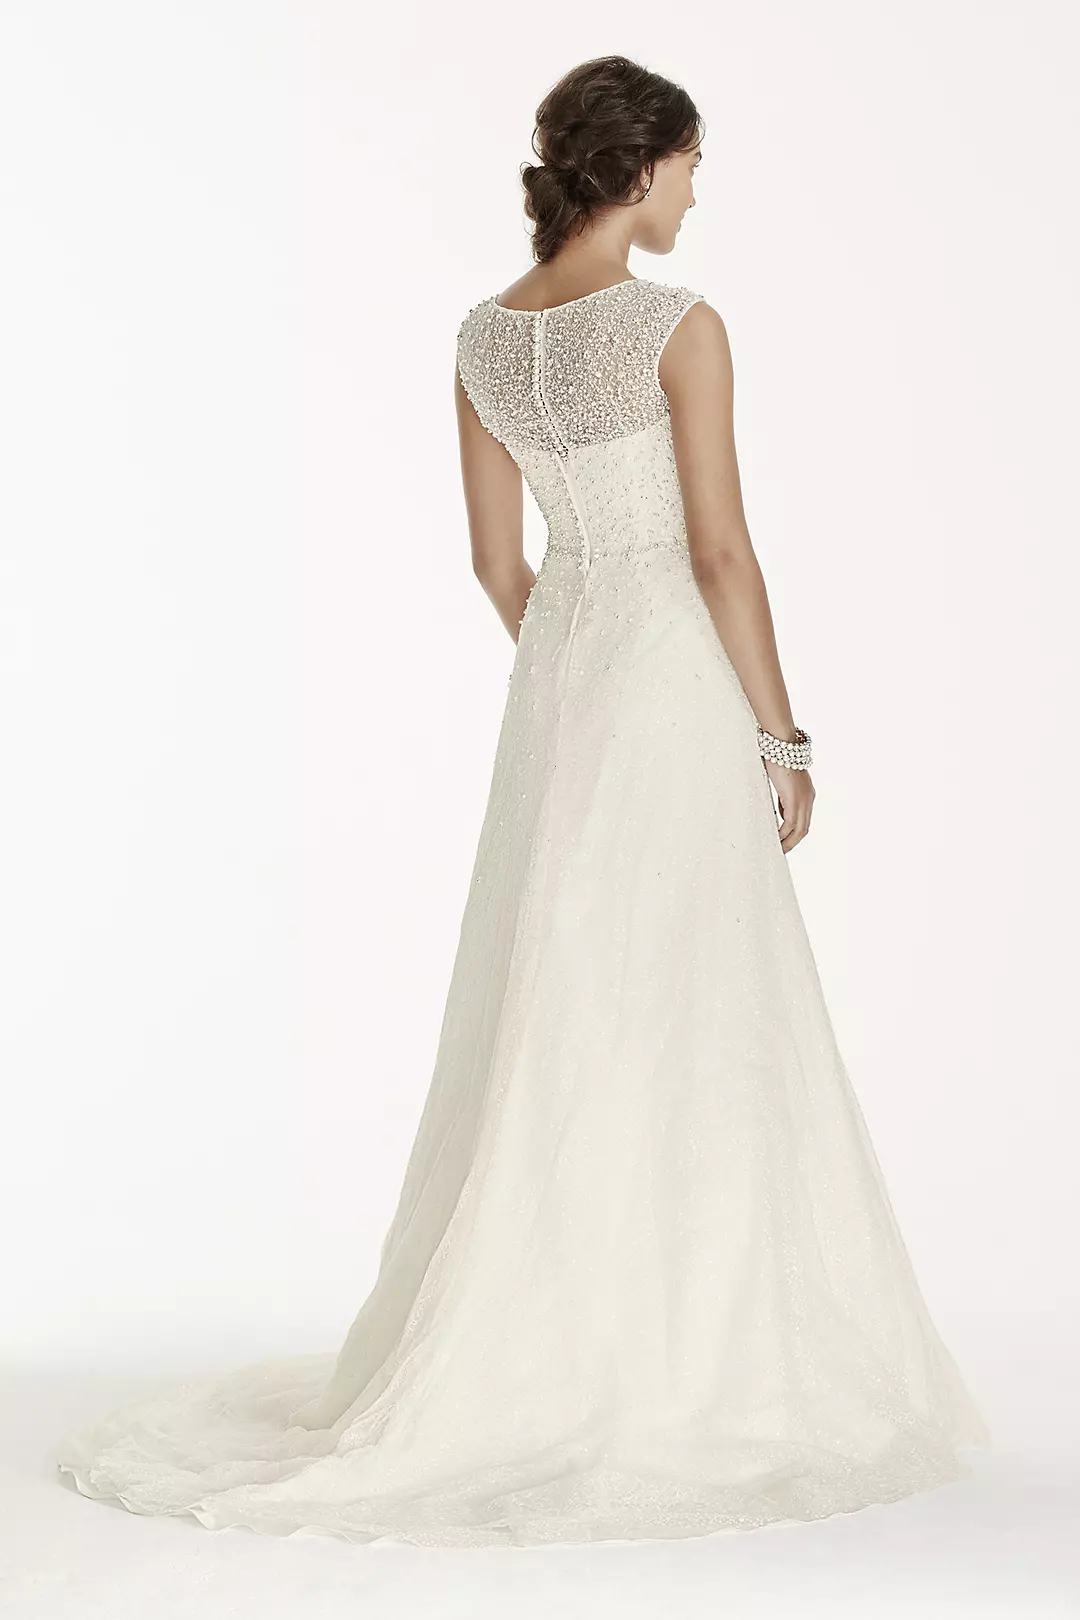 As-Is Cap Sleeve Wedding Dress with Pearl Details Image 2